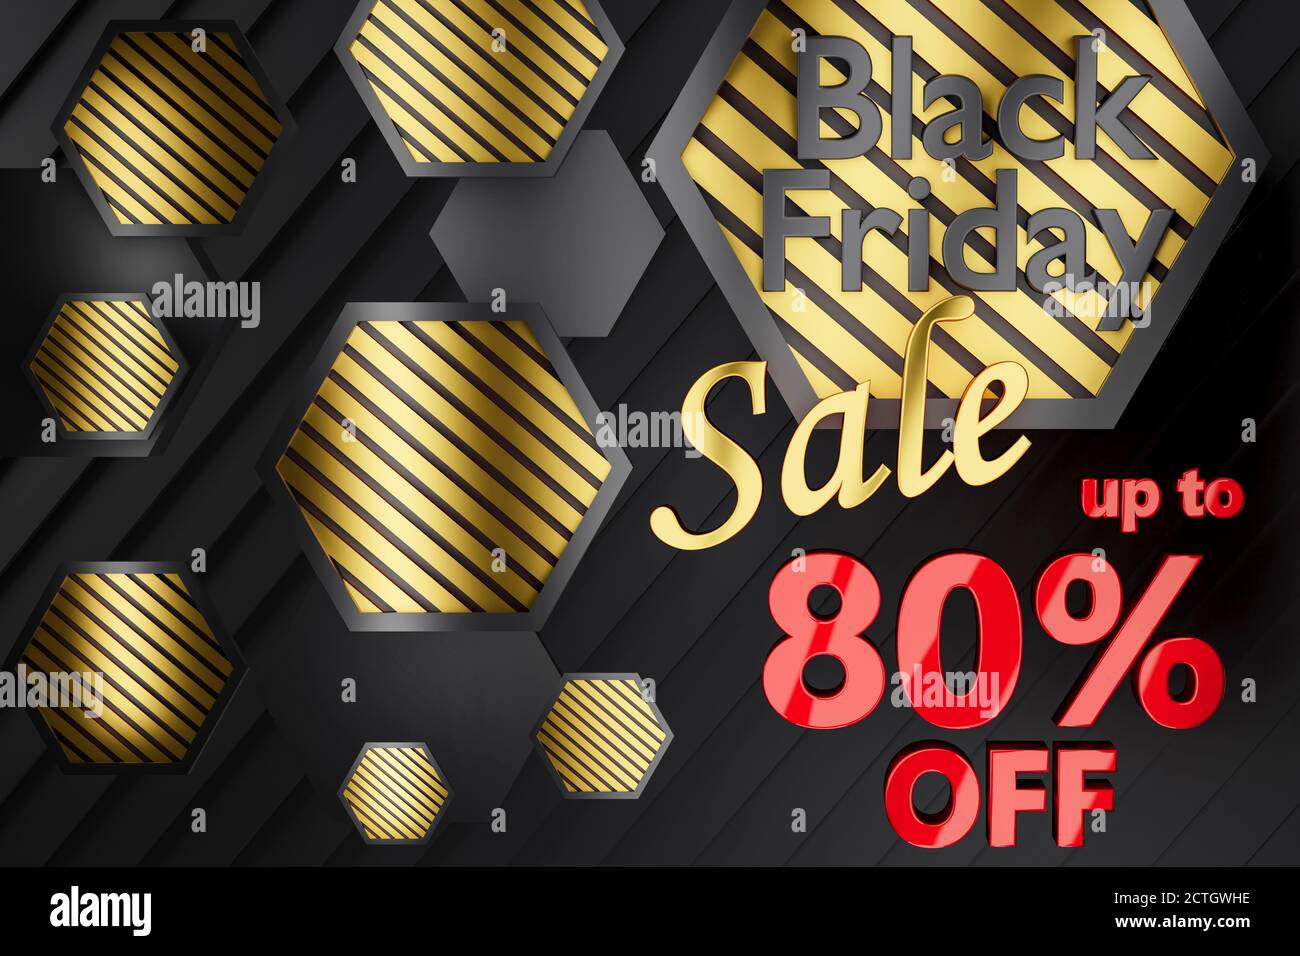 3D black friday sale background image in striking black gold and red design with up to 80% percent off text Stock Photo